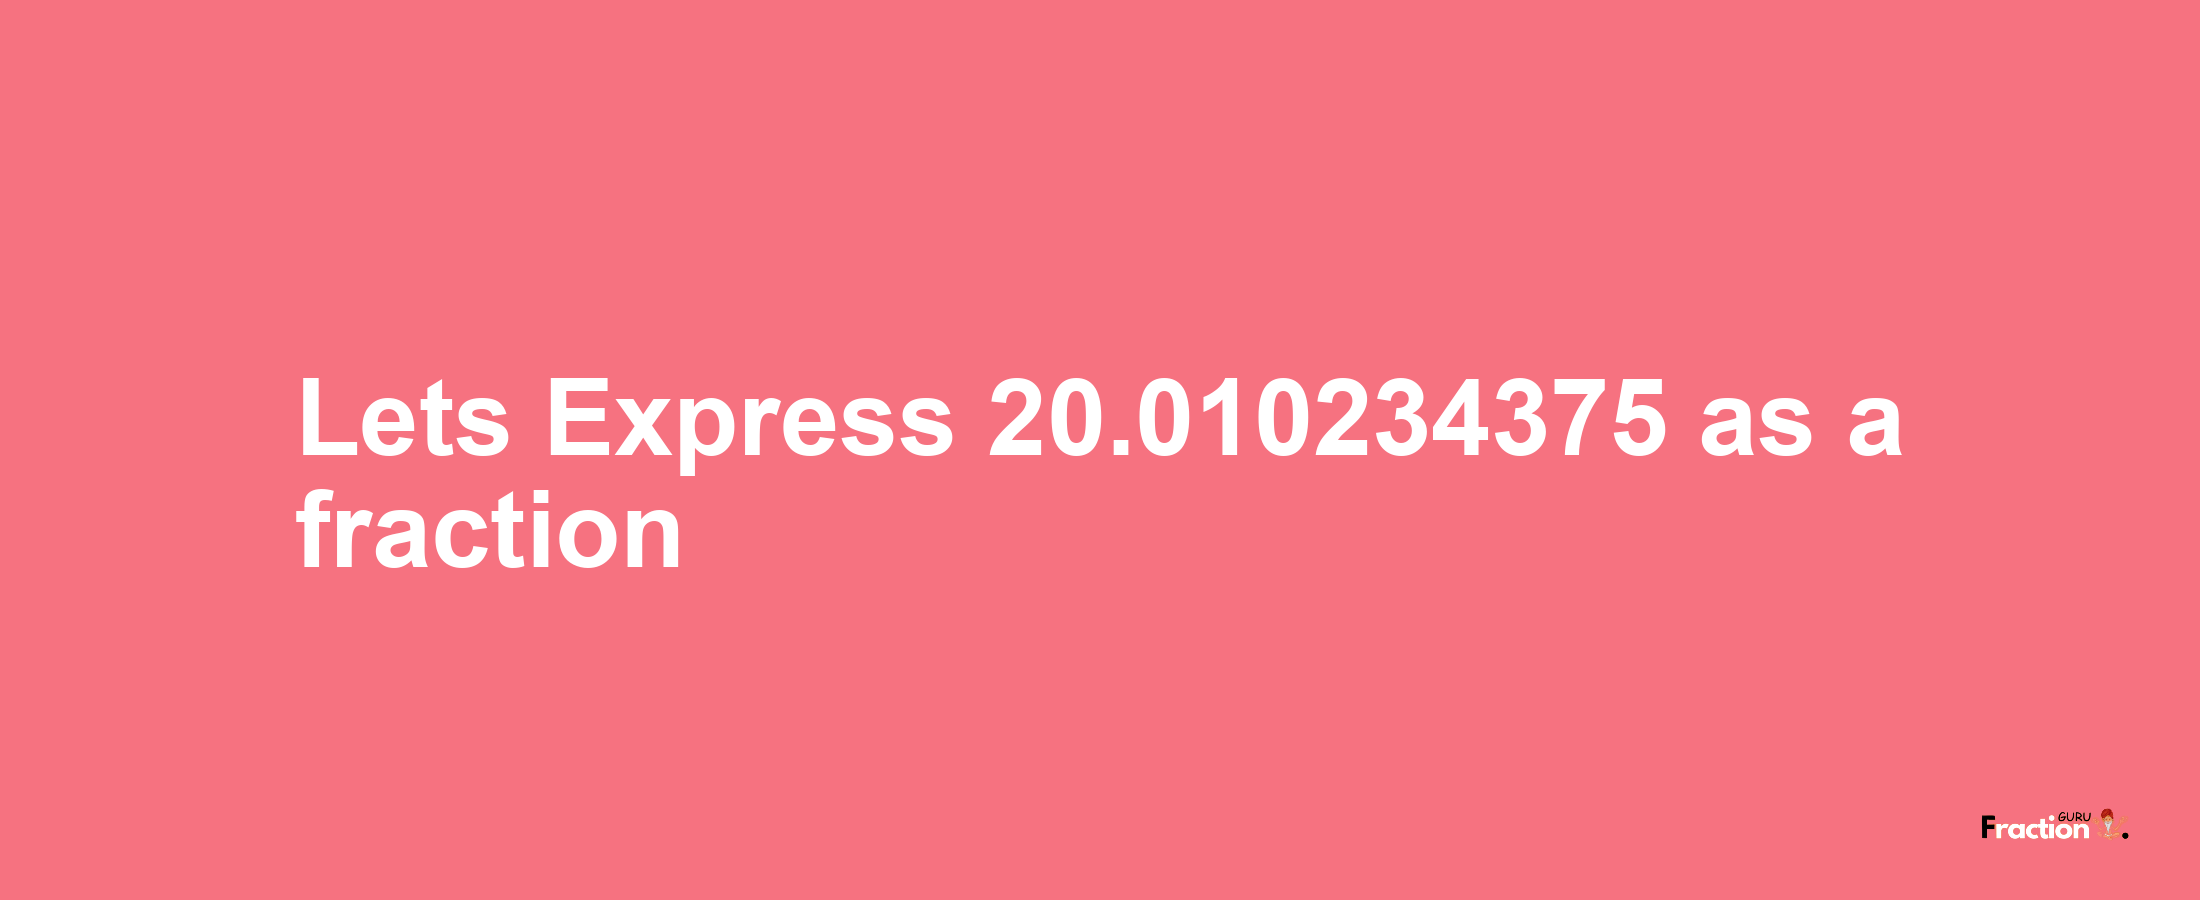 Lets Express 20.010234375 as afraction